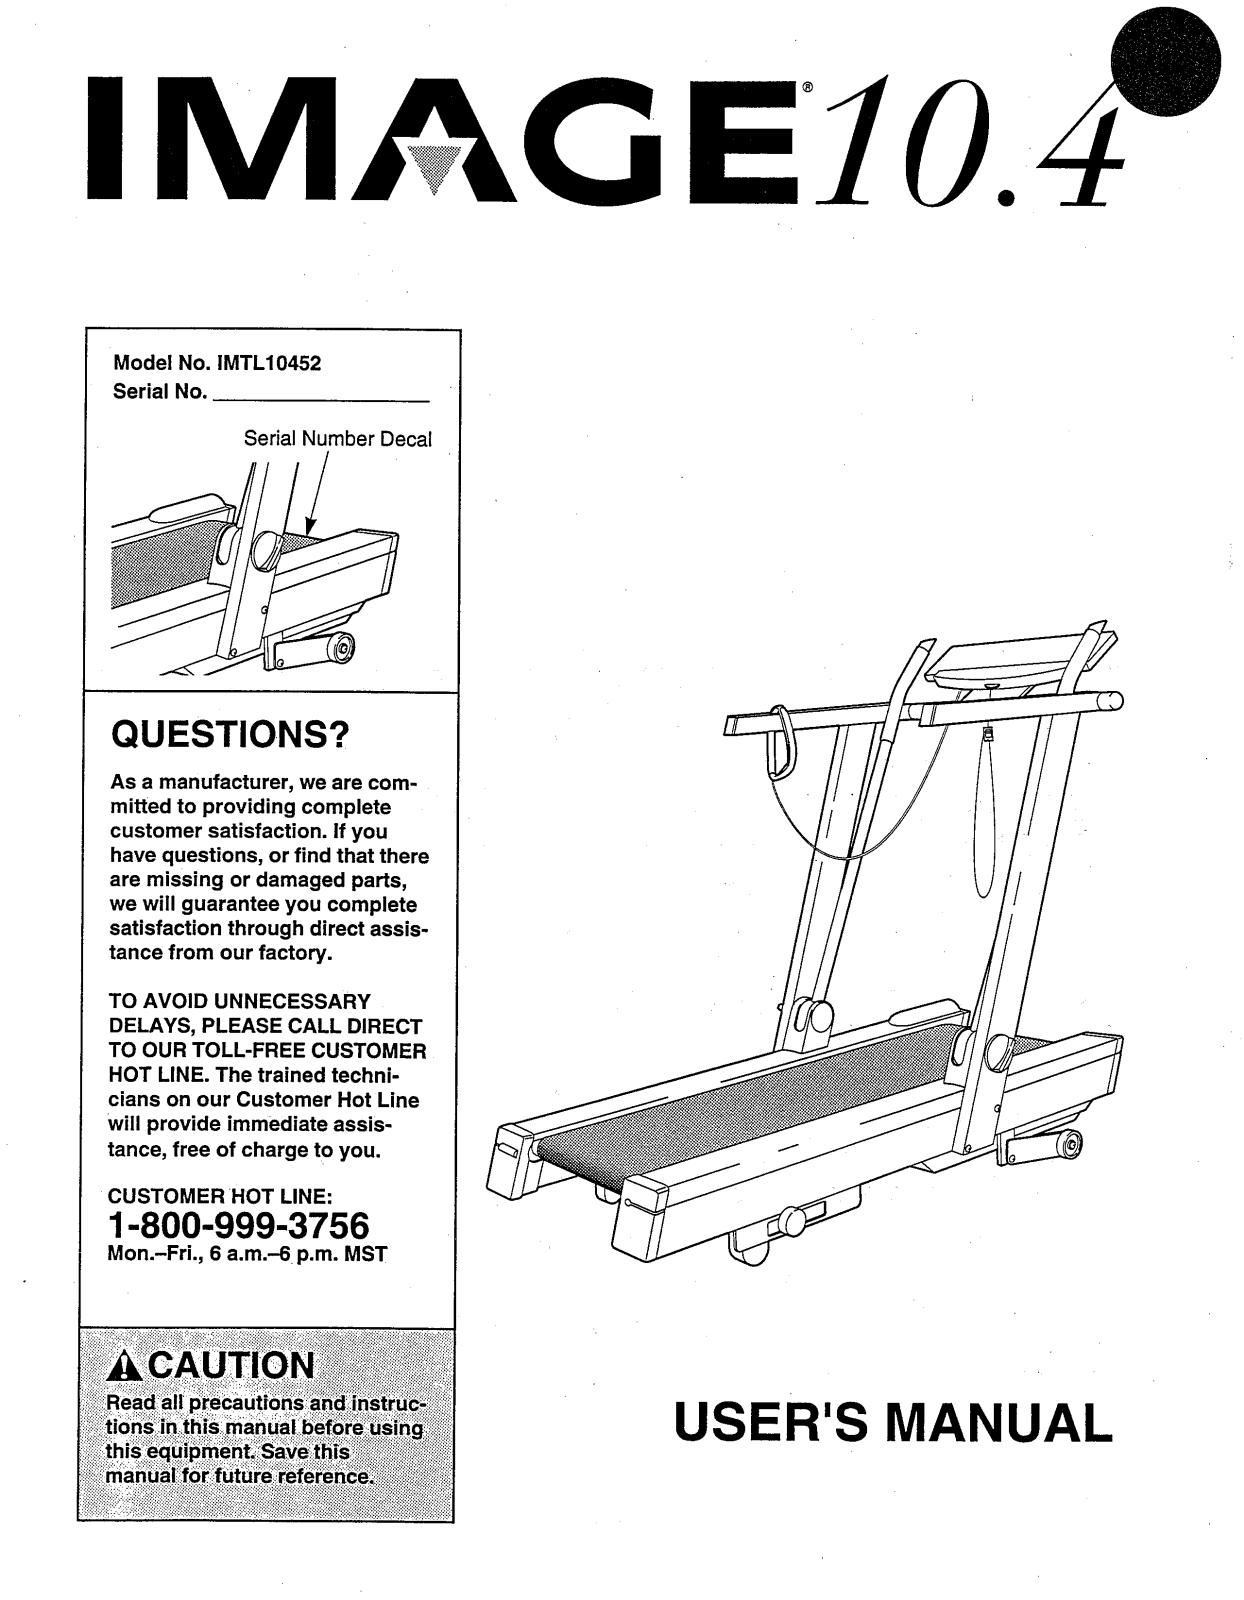 Image IMTL10452 Owner's Manual